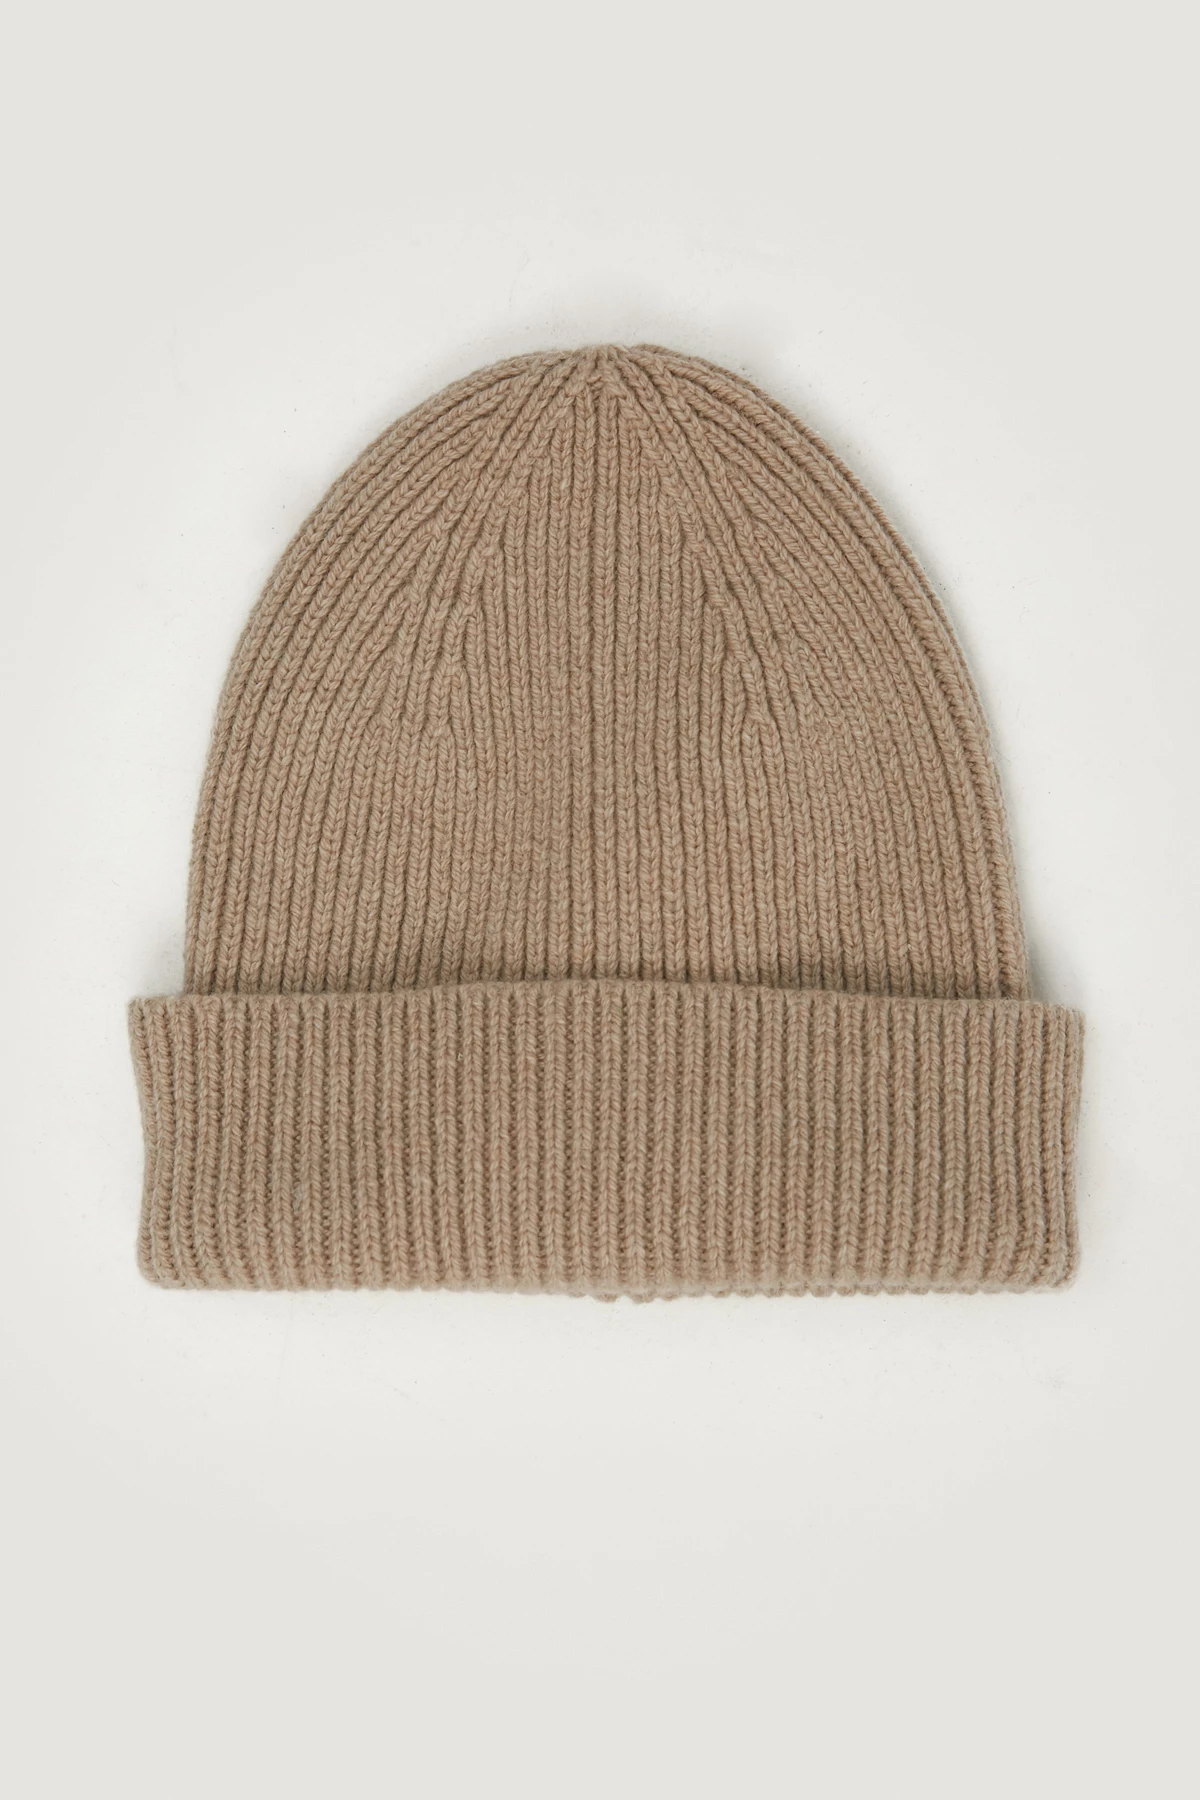 Knitted beige cashmere beanie hat with lapel, photo 4